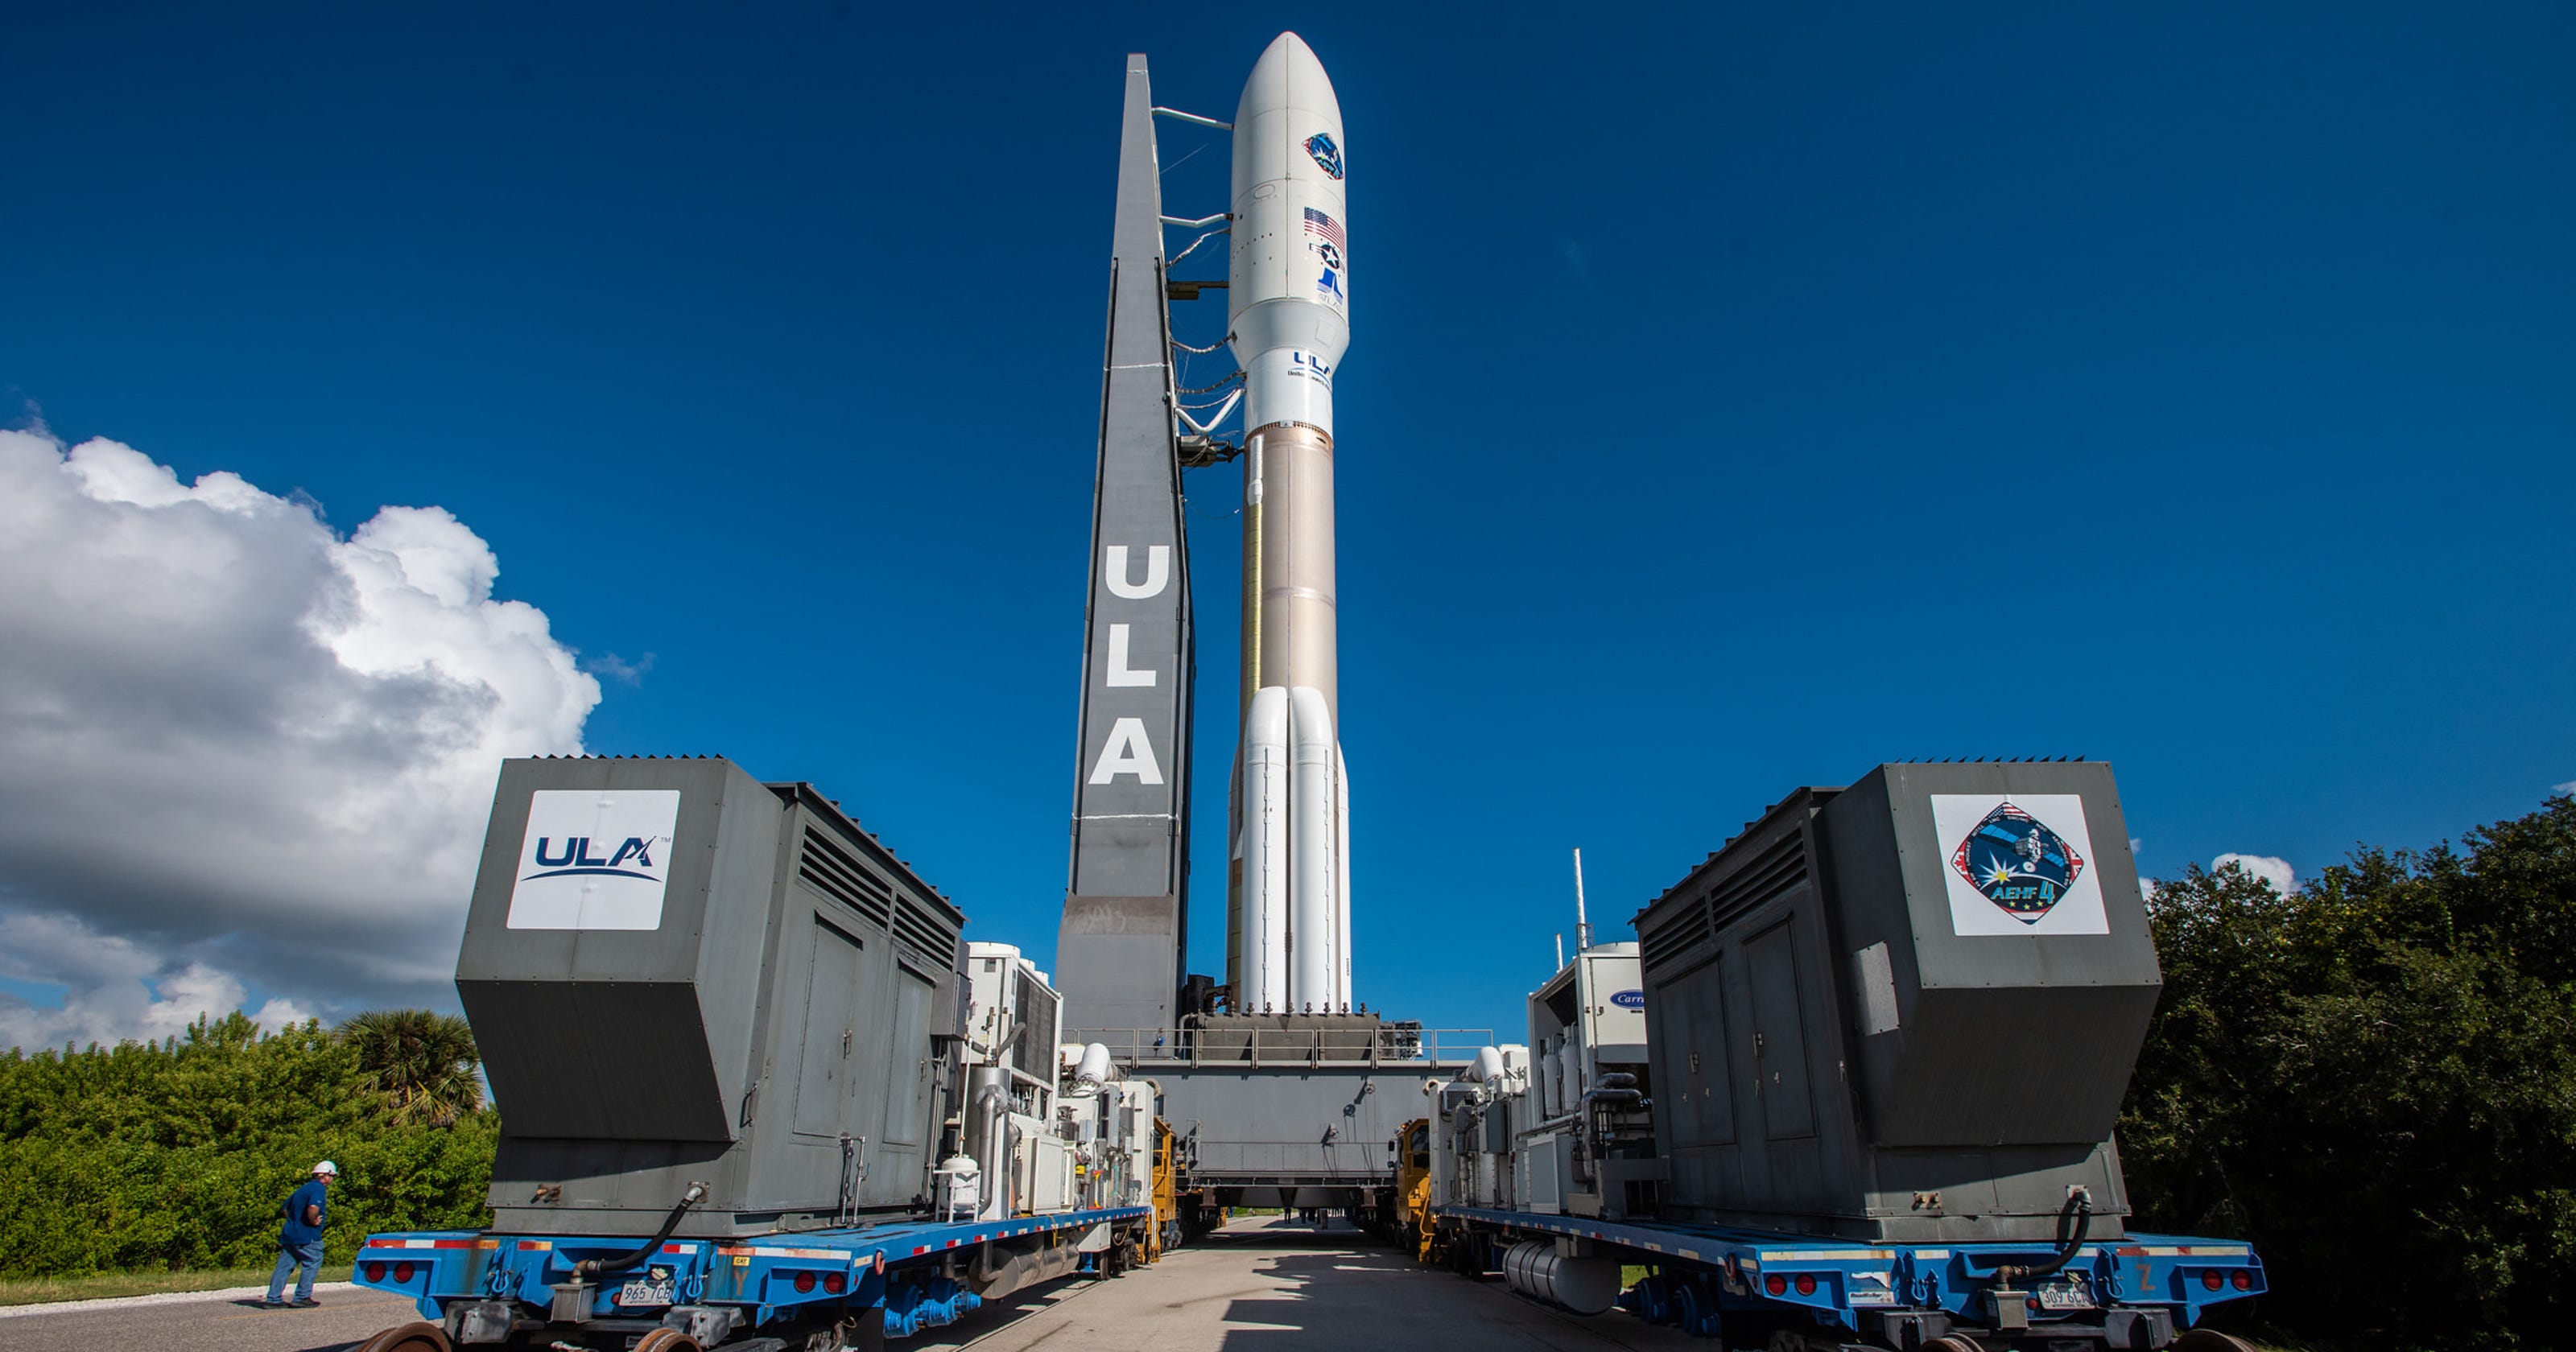 How to watch tonight's powerful Atlas V launch from Cape Canaveral